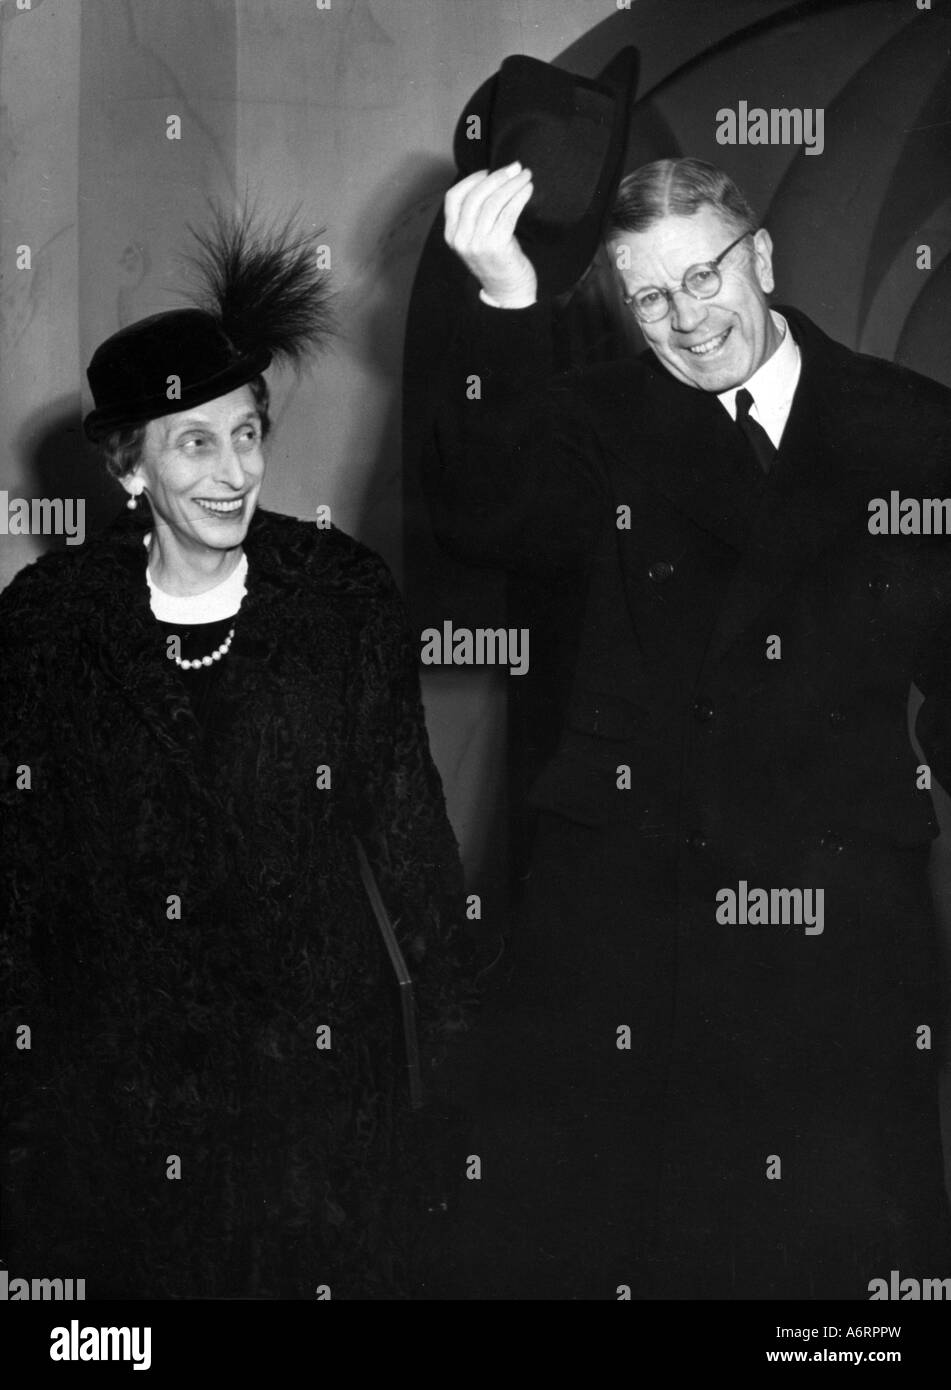 Gustaf VI Adolf, 11.11.1882 -15 9.1973, King of Sweden 19.10.1950 - 15.9.1973, with wife Queen Louise, 1950s, 50s, Bernadotte, G Stock Photo